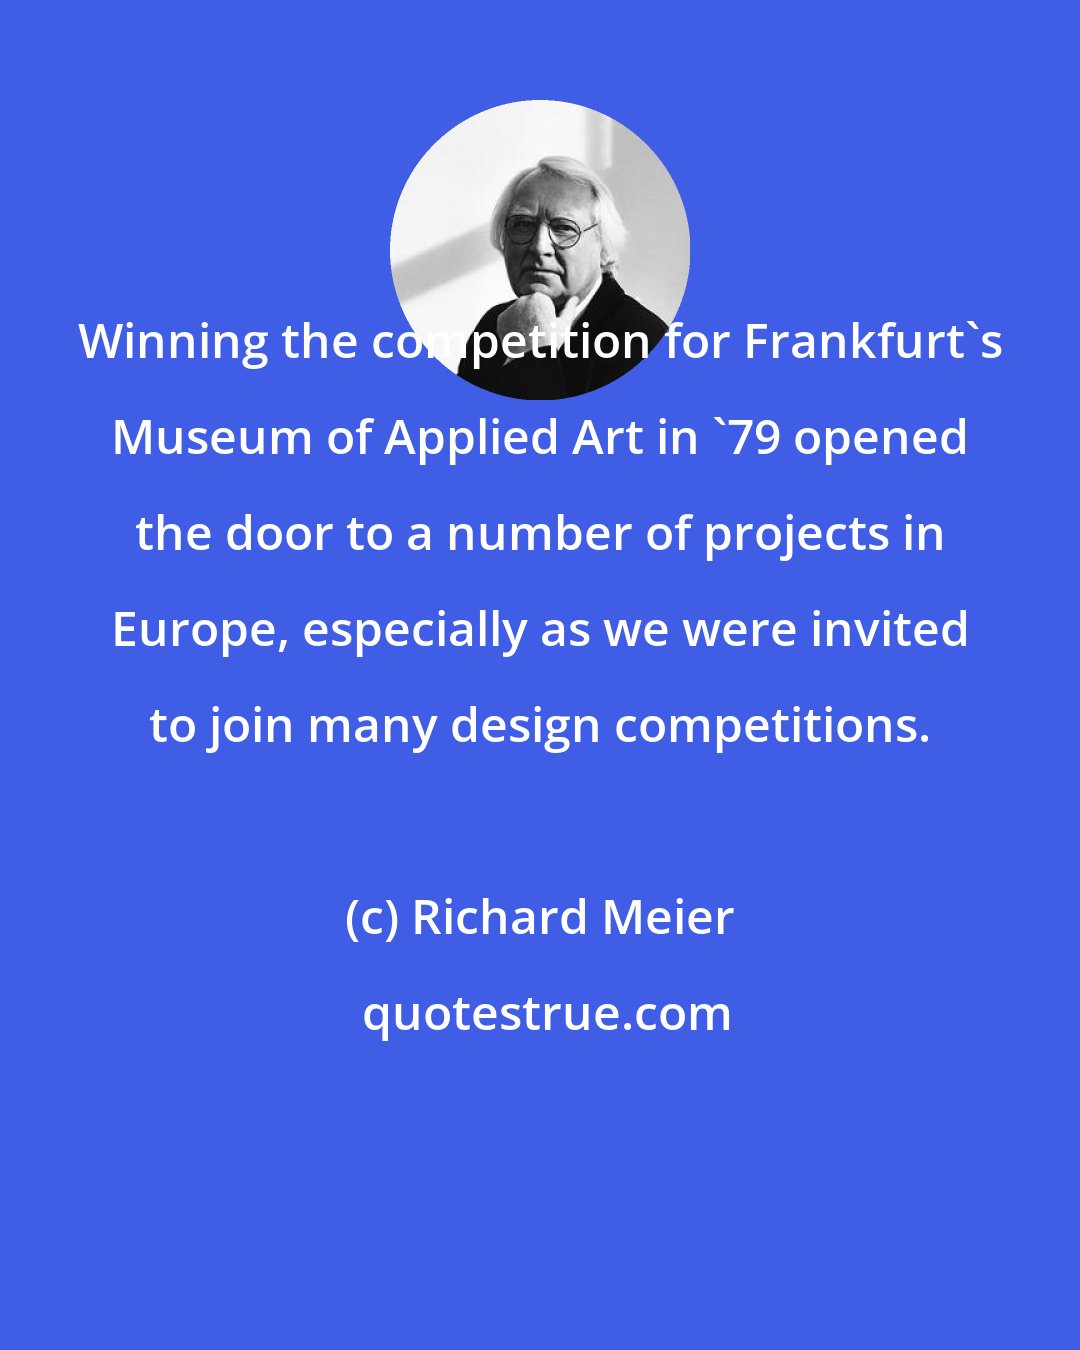 Richard Meier: Winning the competition for Frankfurt's Museum of Applied Art in '79 opened the door to a number of projects in Europe, especially as we were invited to join many design competitions.